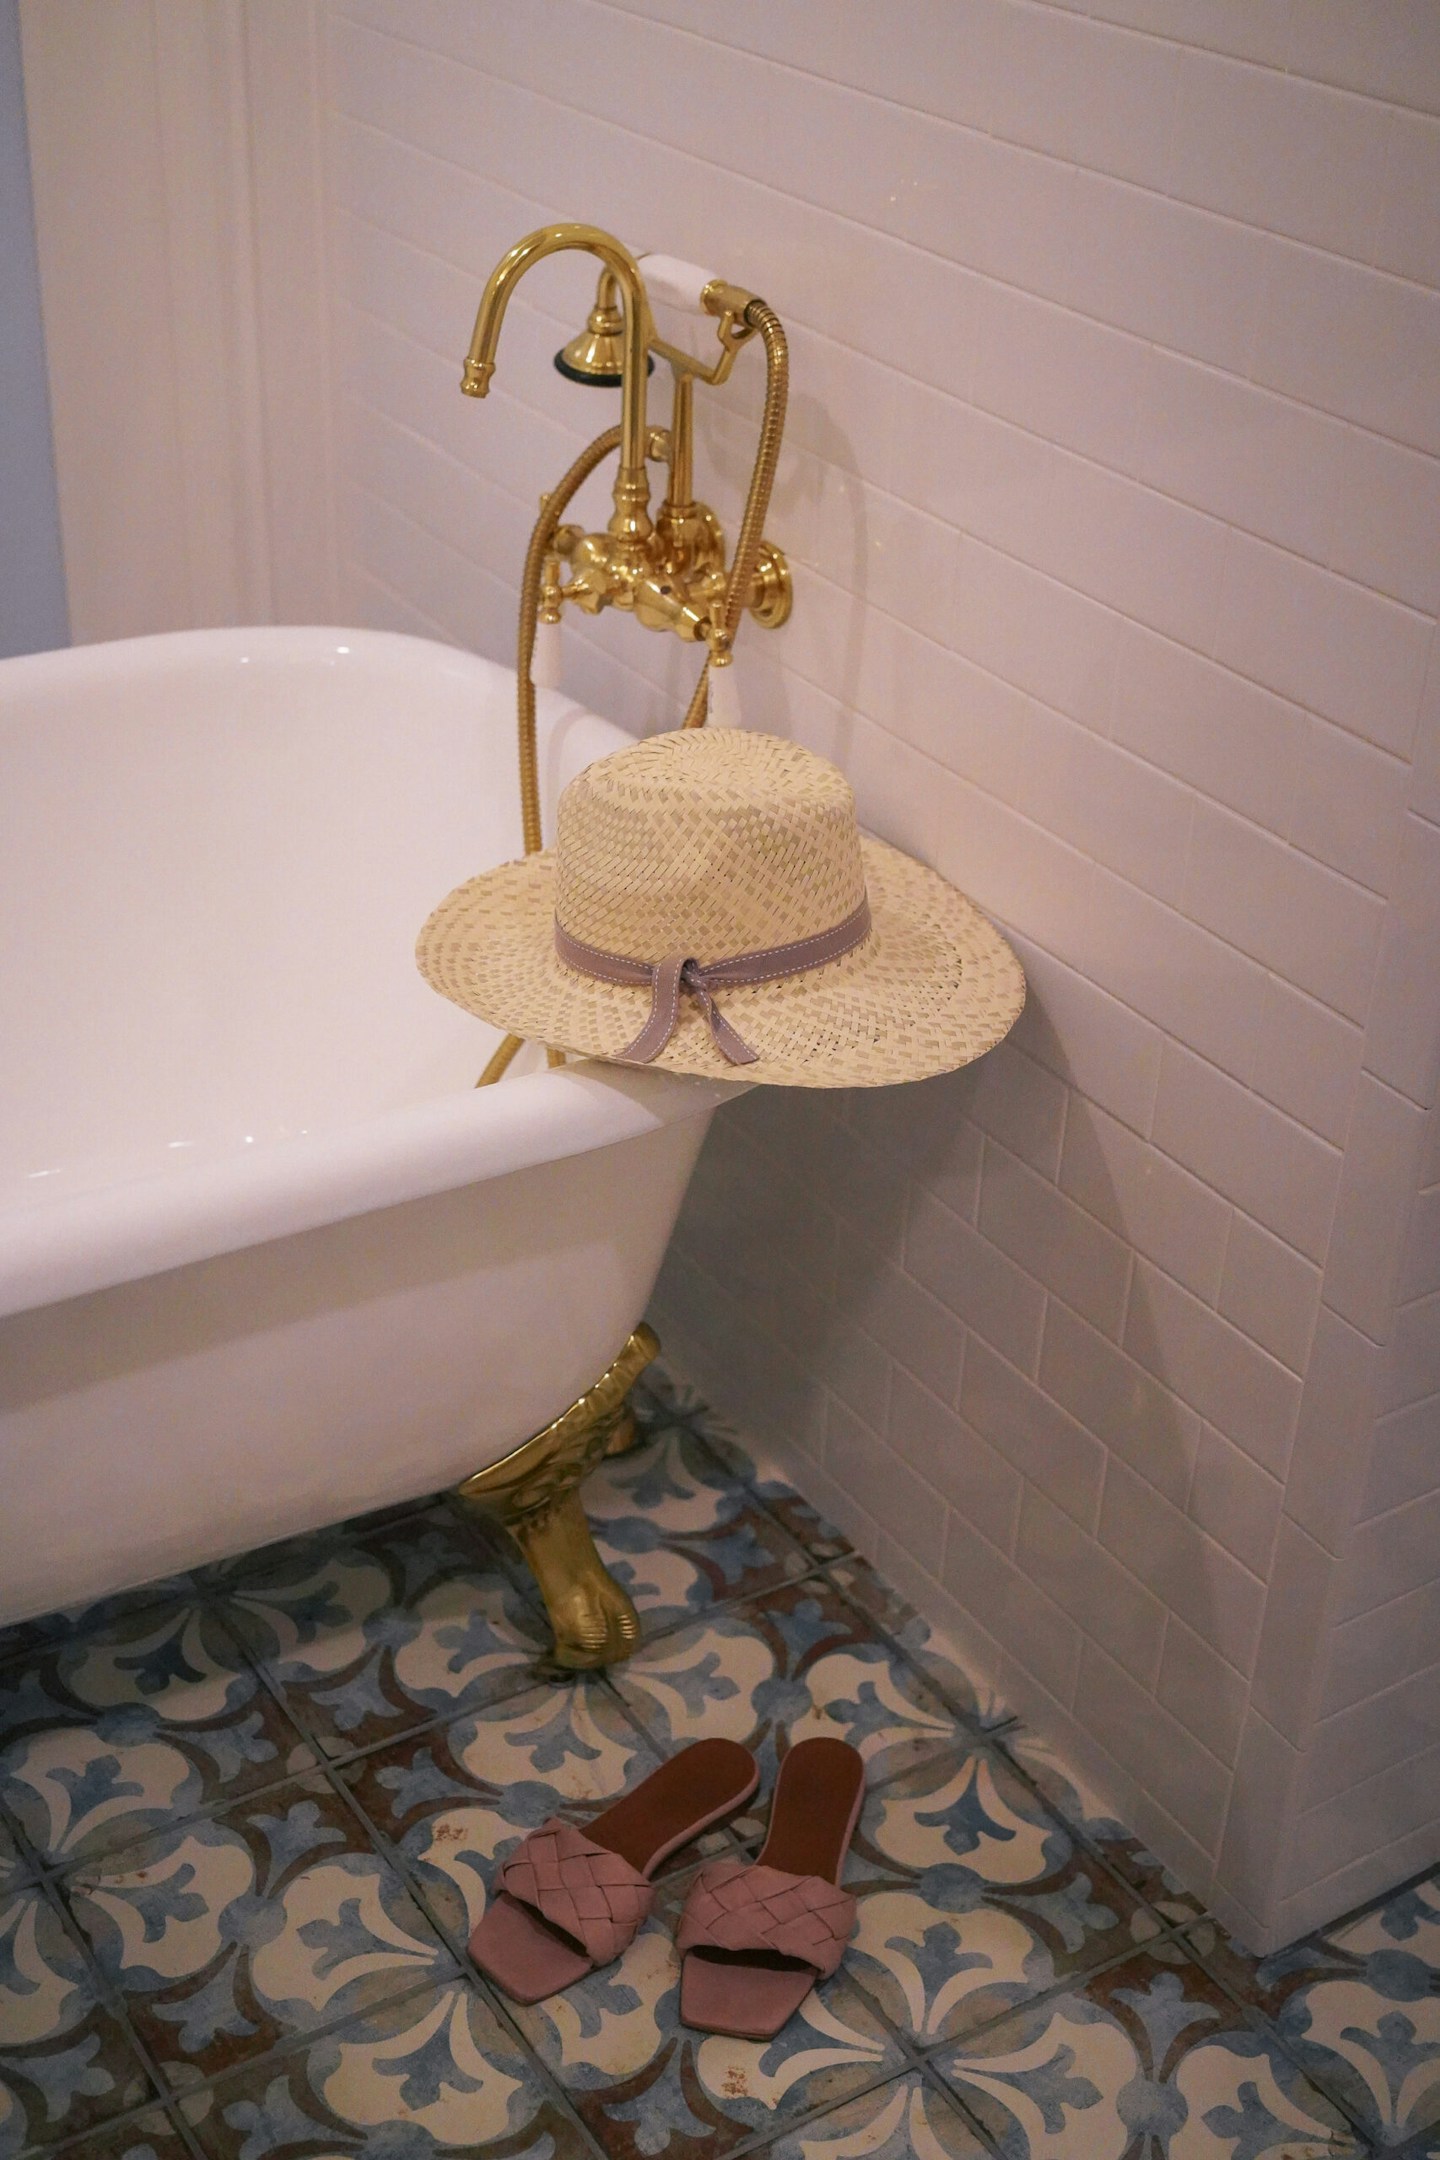 The gorgeous soaker cast iron bathtub at Grassy Flats Resort and Beach Club was perfect for unwinding after a busy day in the Florida Keys.